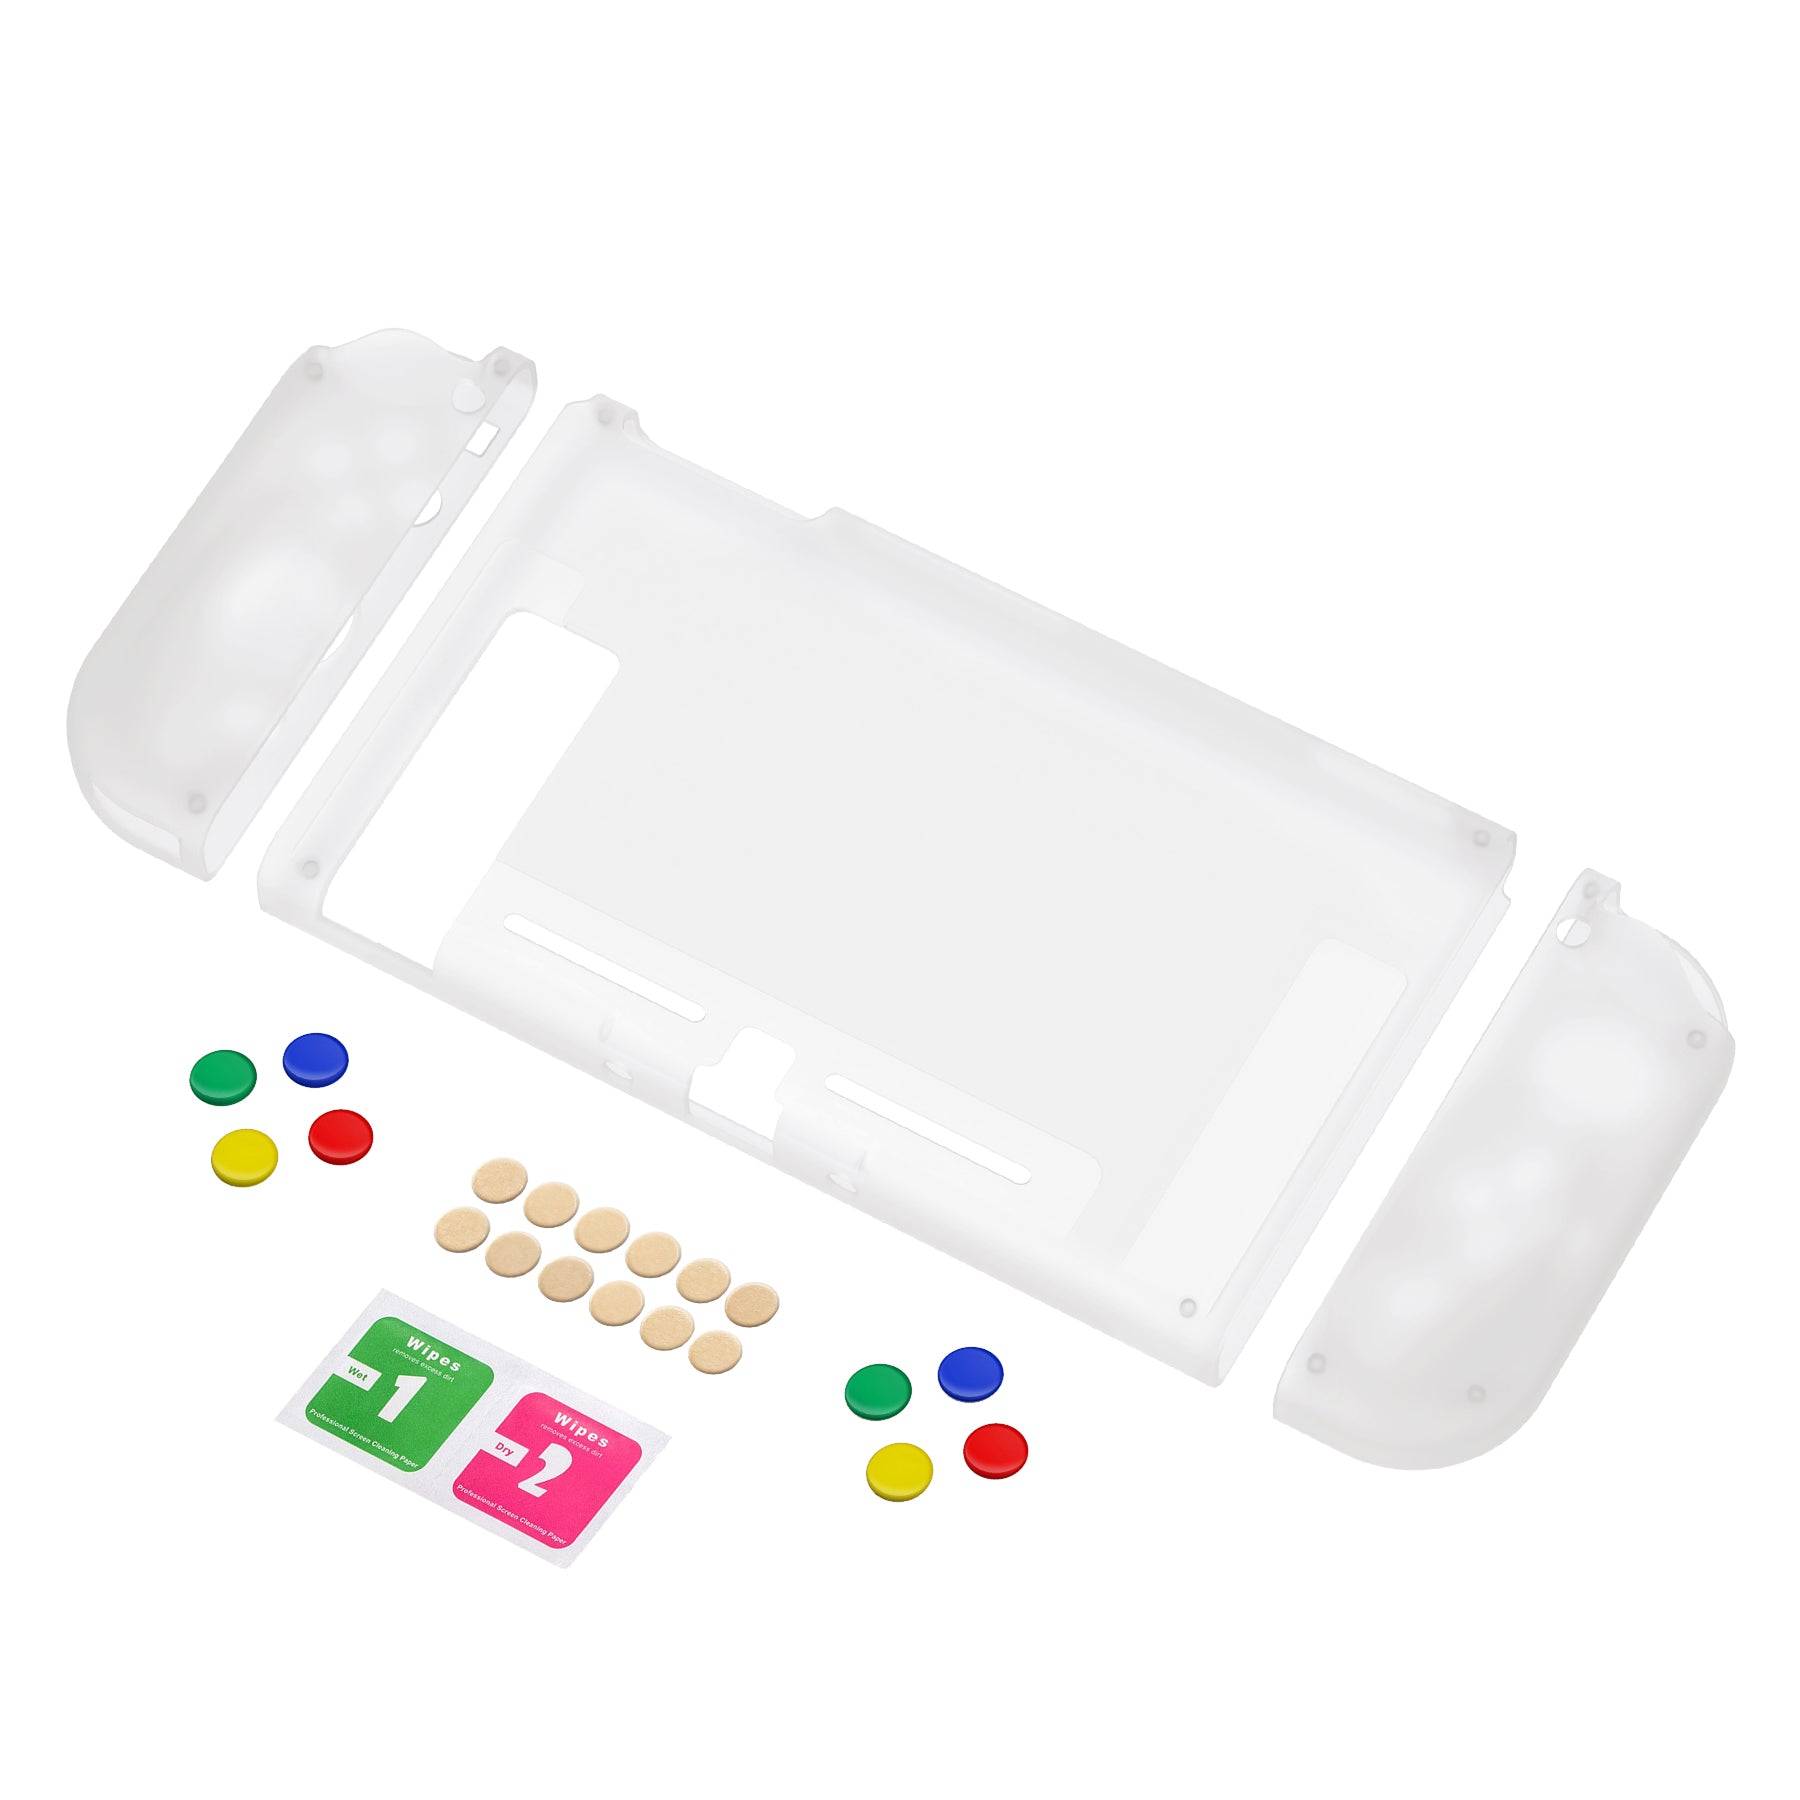 PlayVital Transparent Clear Protective Case for NS Switch, Soft TPU Slim Case Cover for NS Switch Joy-Con Console with Colorful ABXY Direction Button Caps - NTU6008 PlayVital